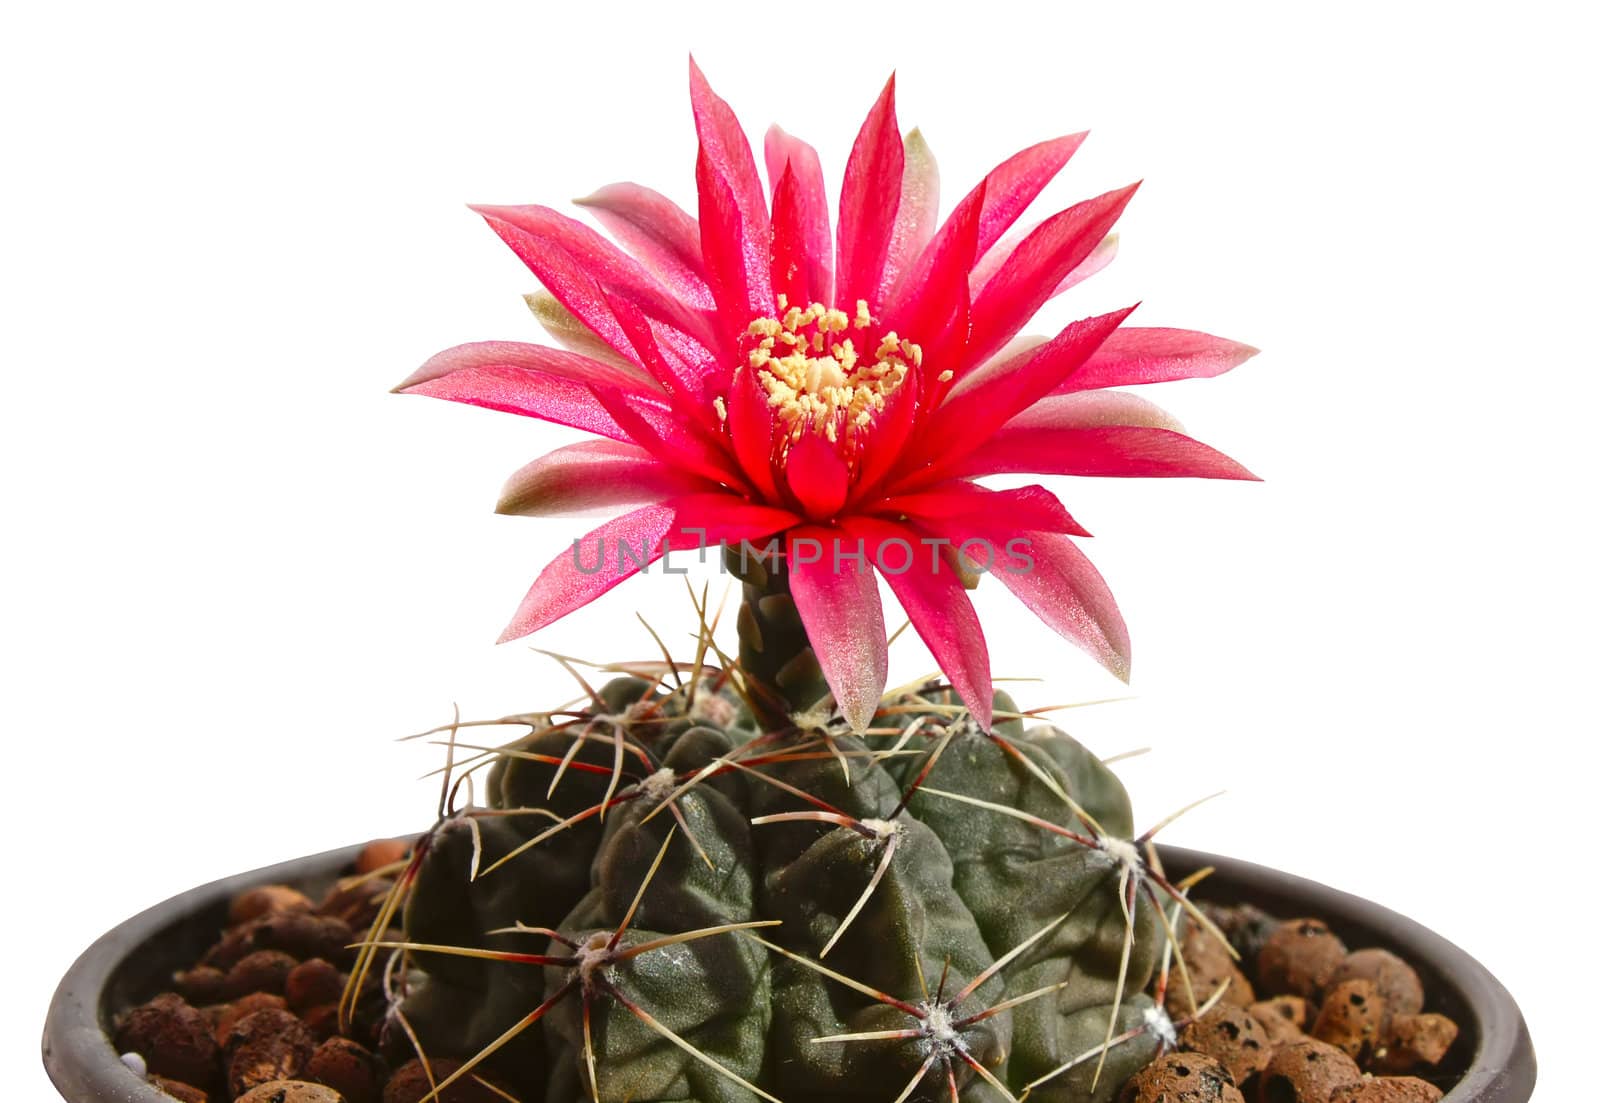 Cactus with a big red flower (Gymnocalycium baldianum), isolated on a white background.